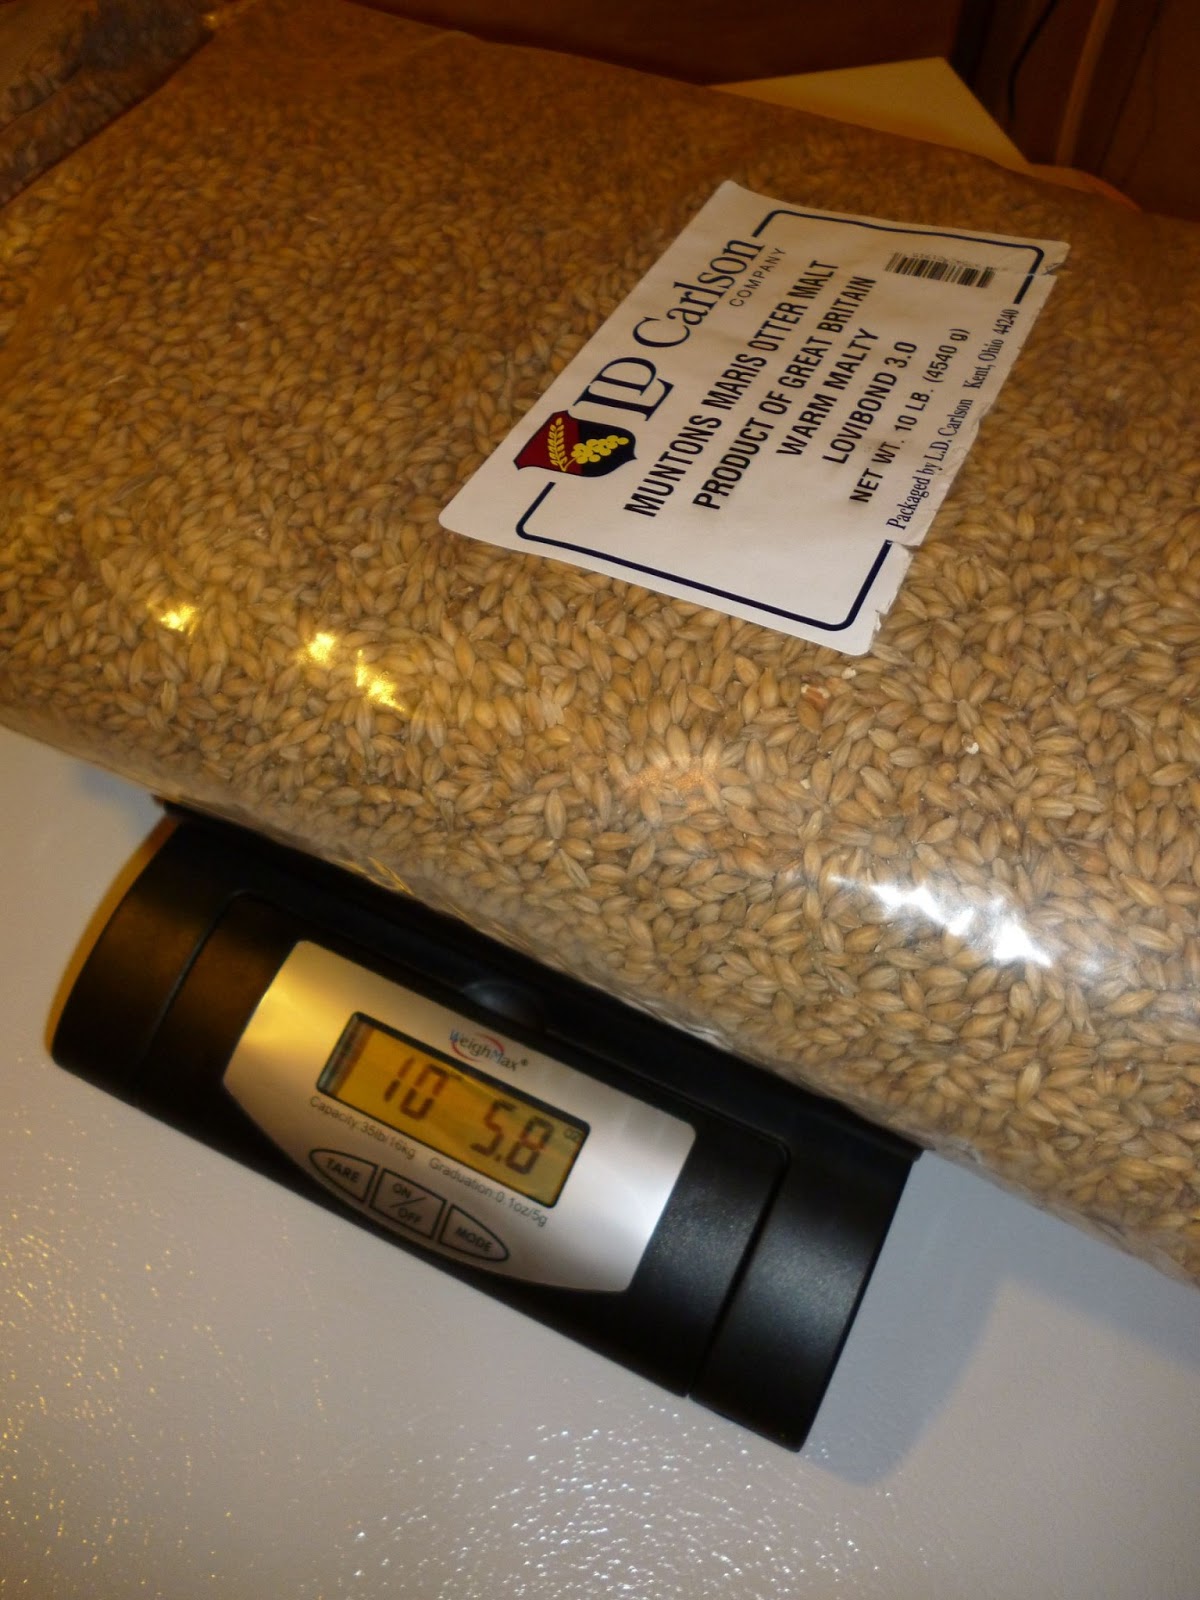 Hands On Review: Weighmax 4819 55 LB Capacity Digital Scale | Homebrew